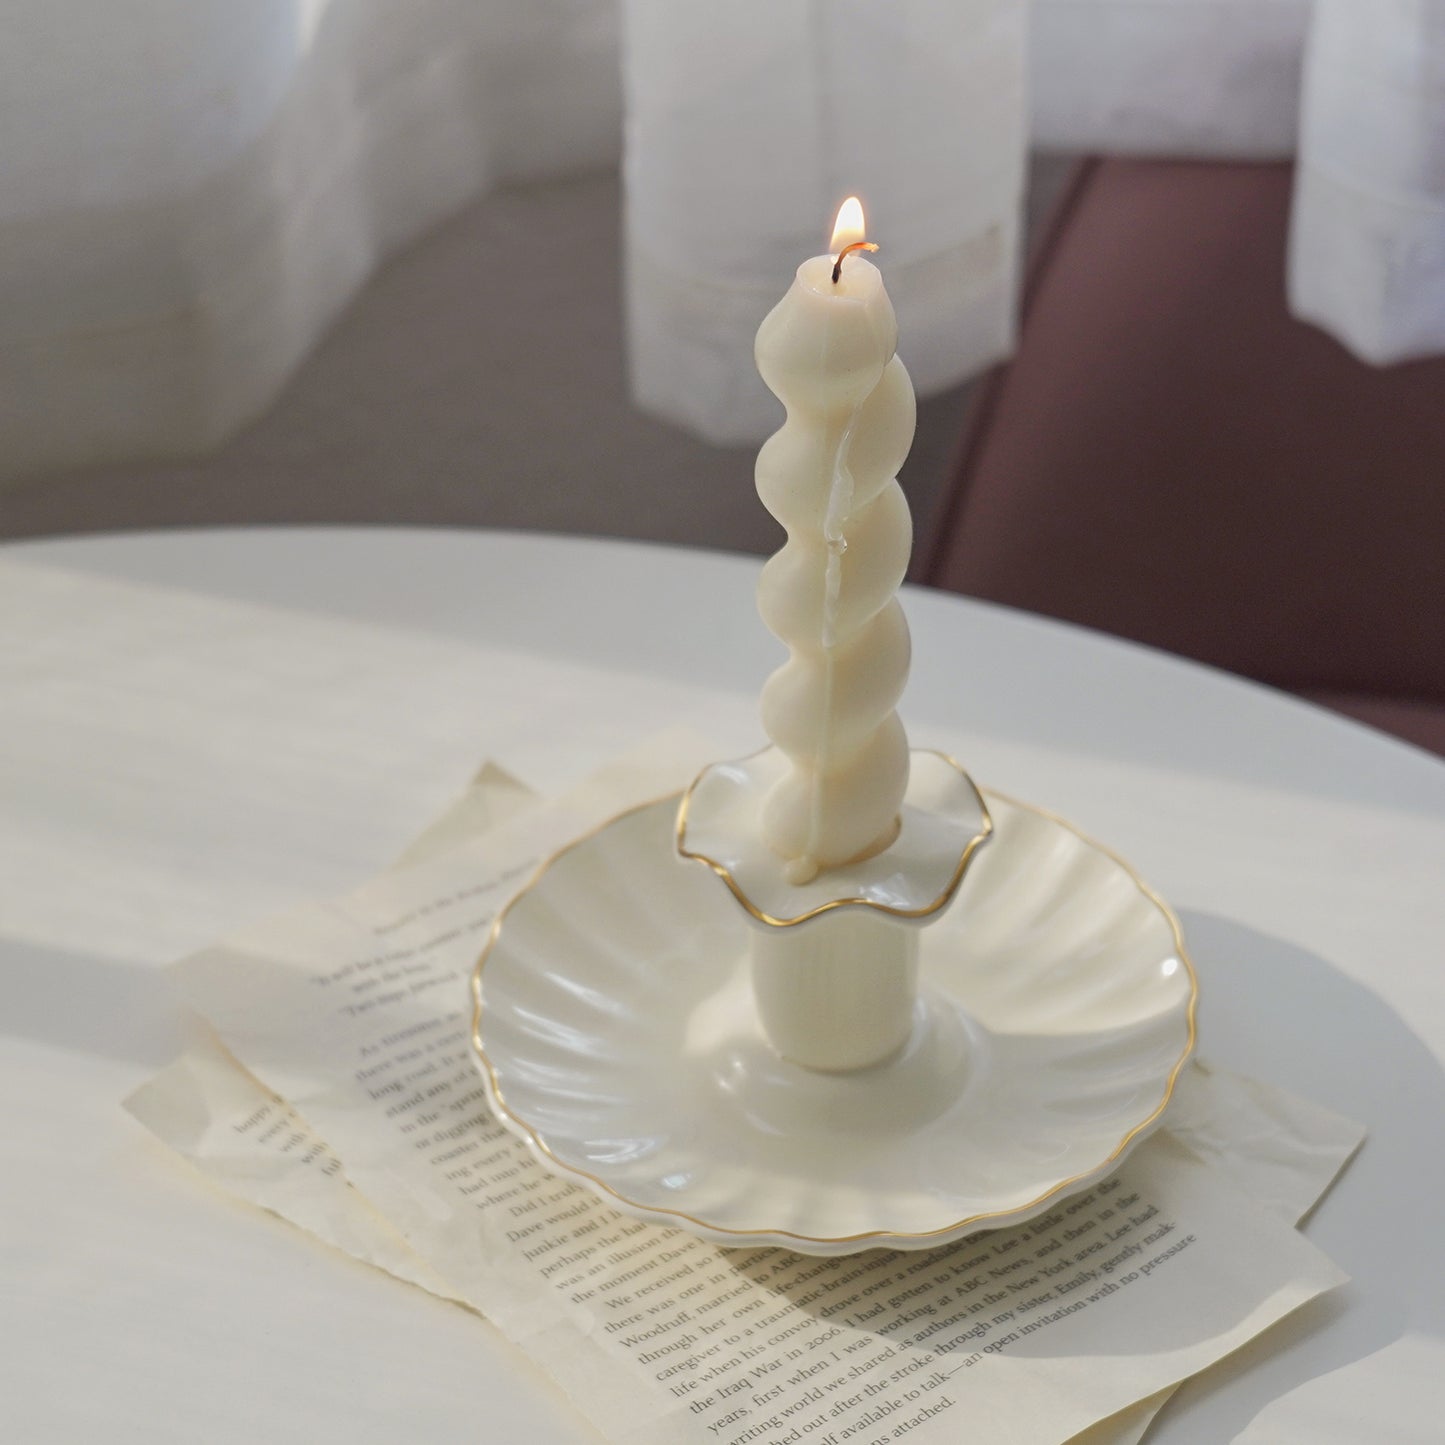 a lit white wavy spiral taper soy pillar candle in a white gold rim ruffle vintage candle holder on book pages